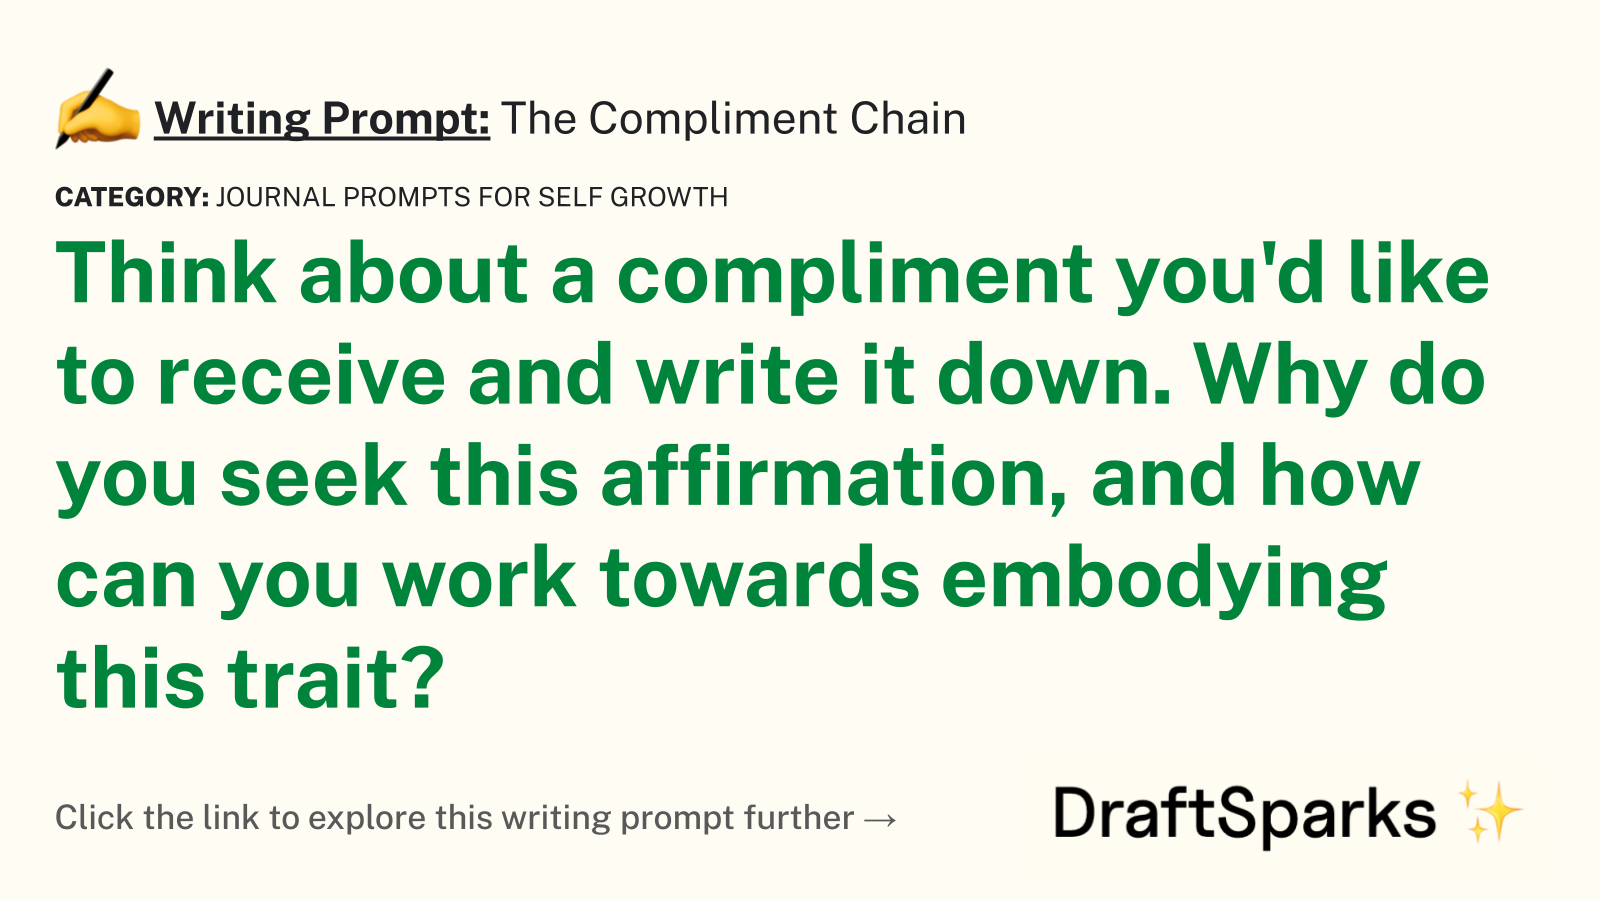 The Compliment Chain